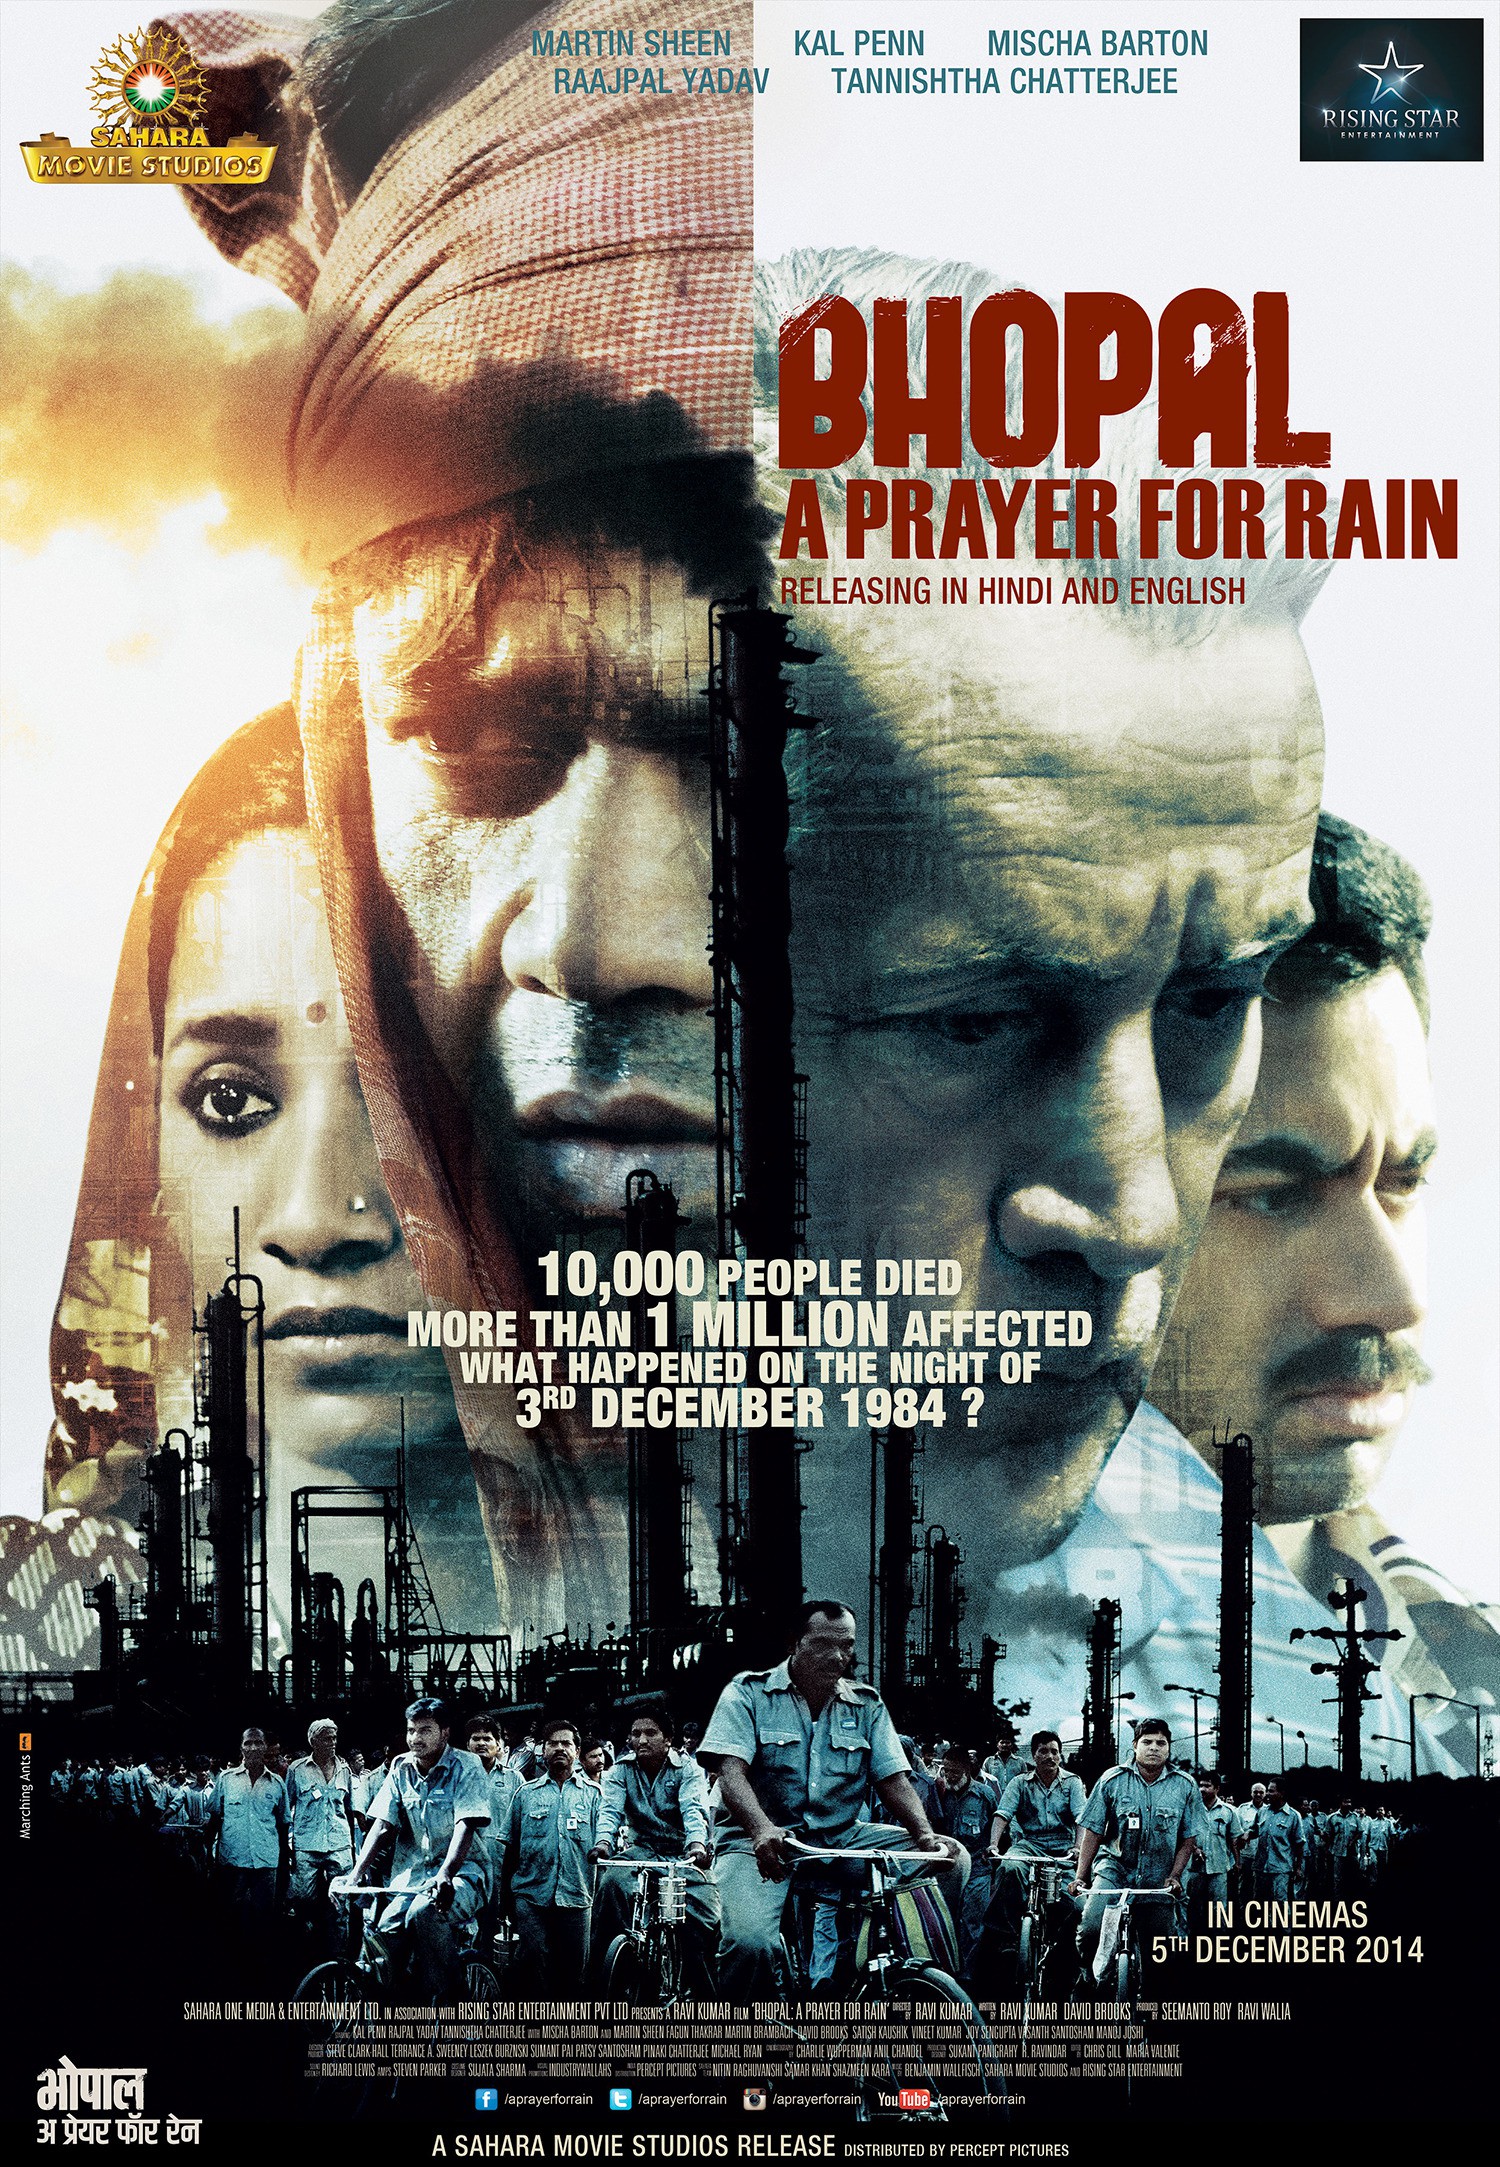 Mega Sized Movie Poster Image for Bhopal: A Prayer for Rain (#5 of 5)